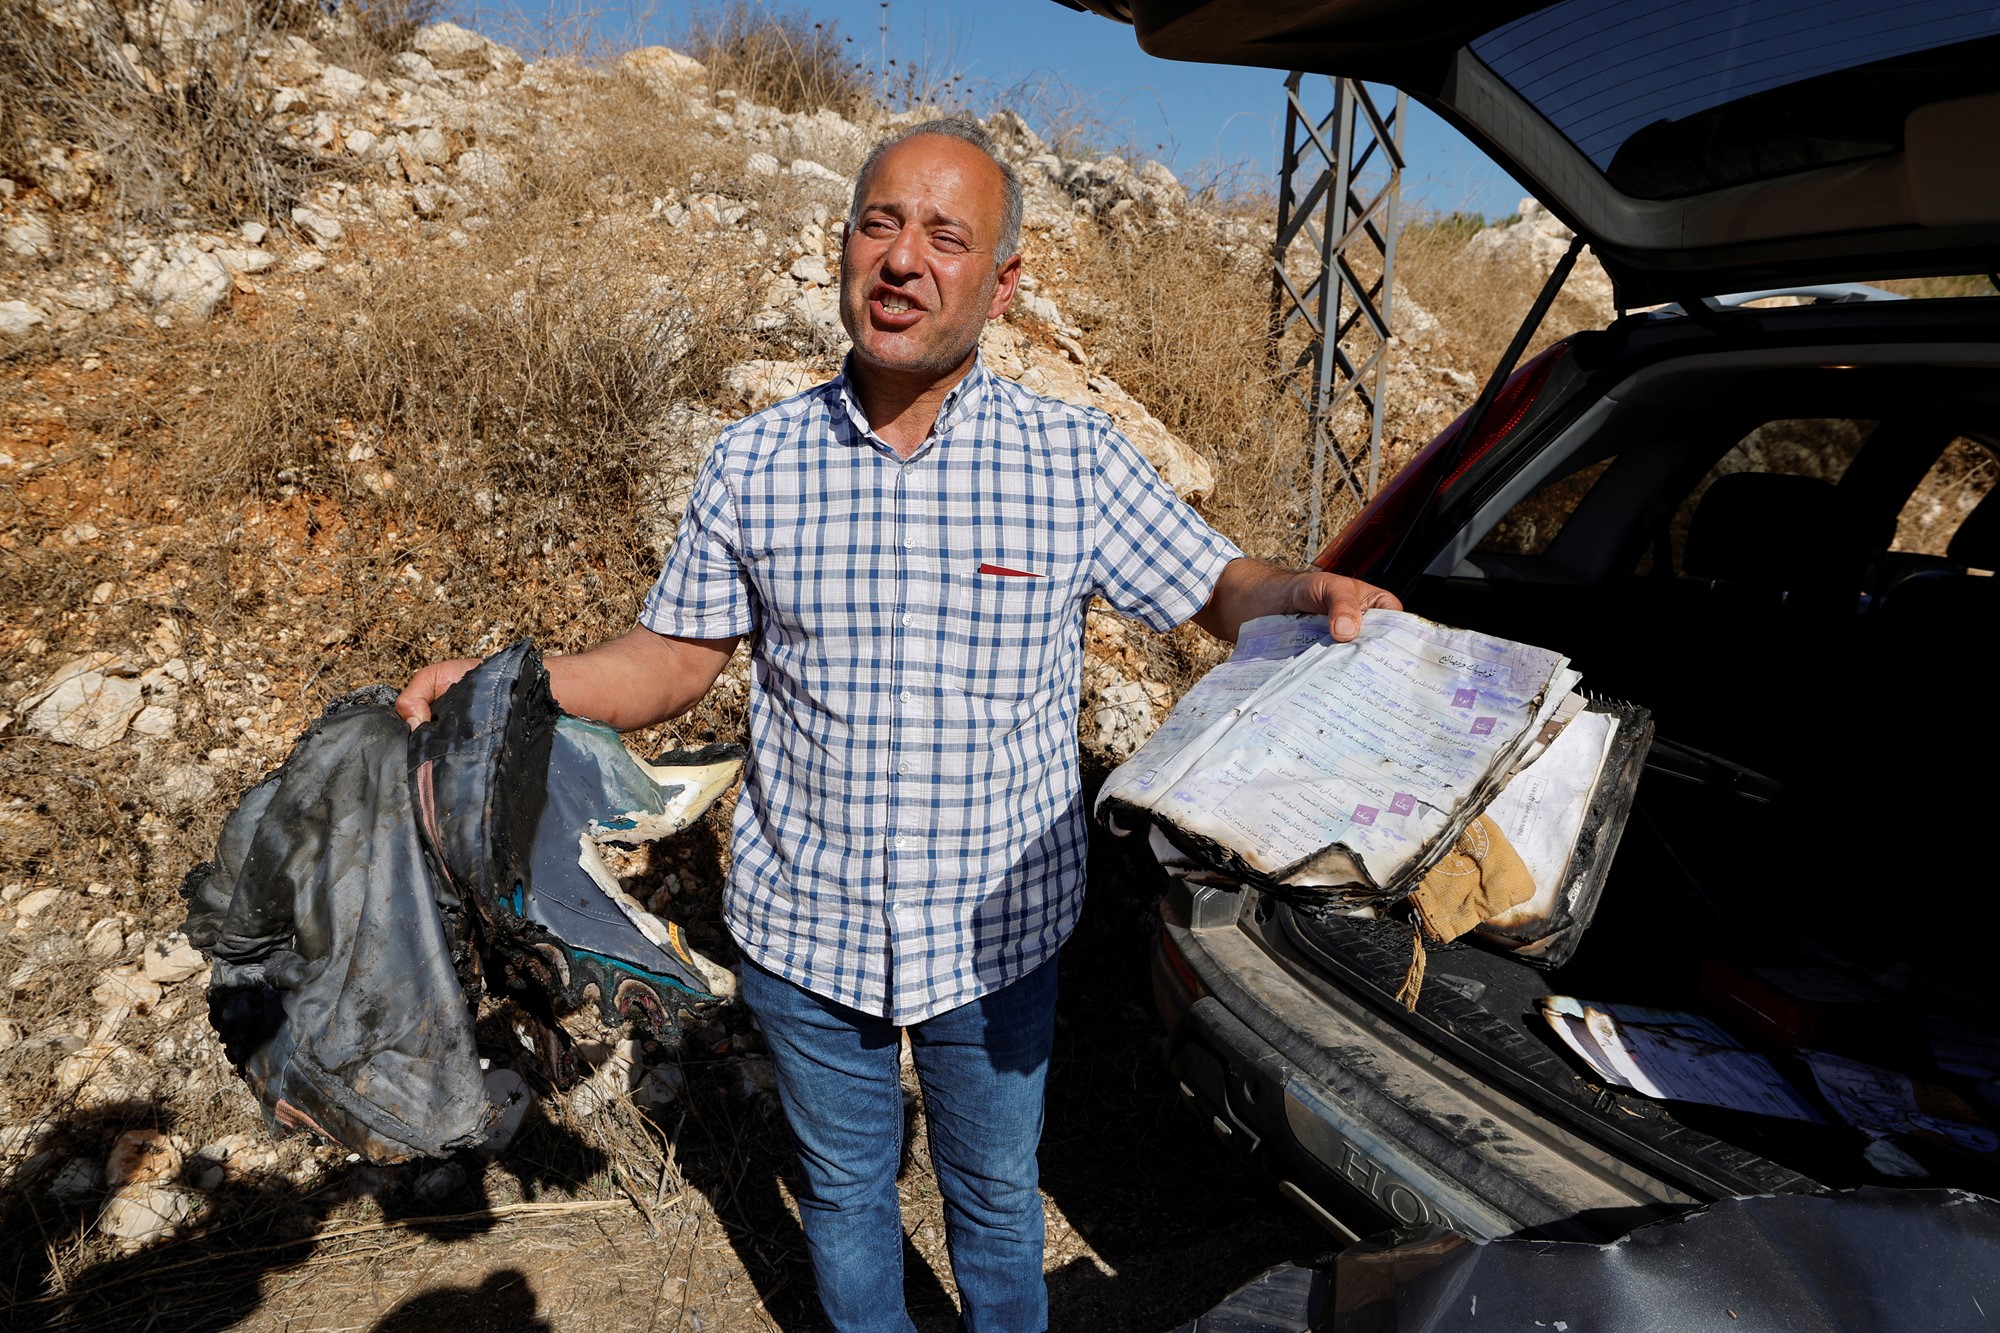 A man stands next to an open car boot holding what looks like a burnt backpack and a charred notebook or school book